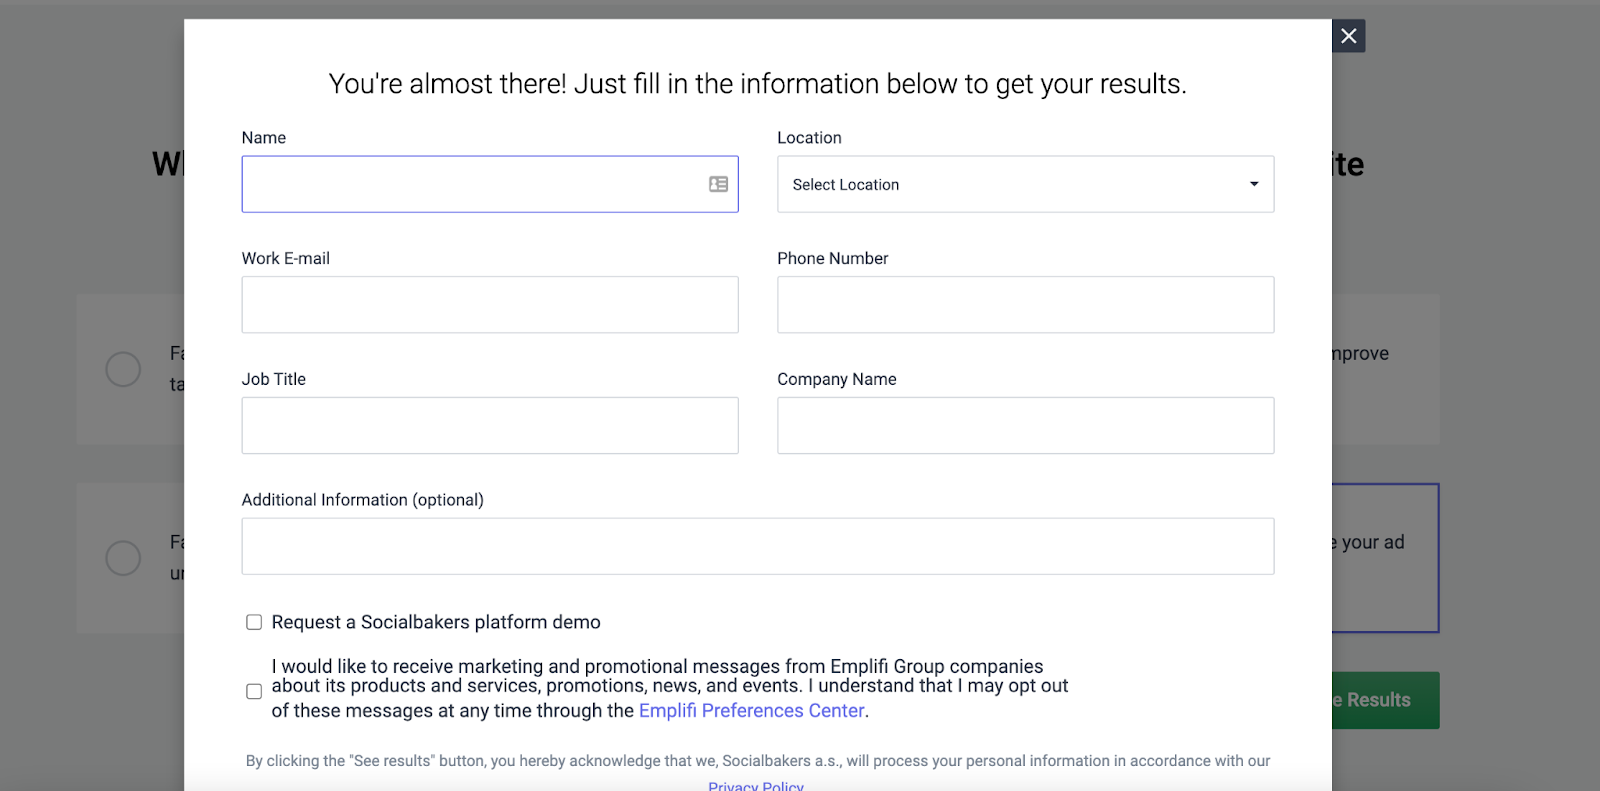 SocialBakers offers a social media quiz to urge email sign ups